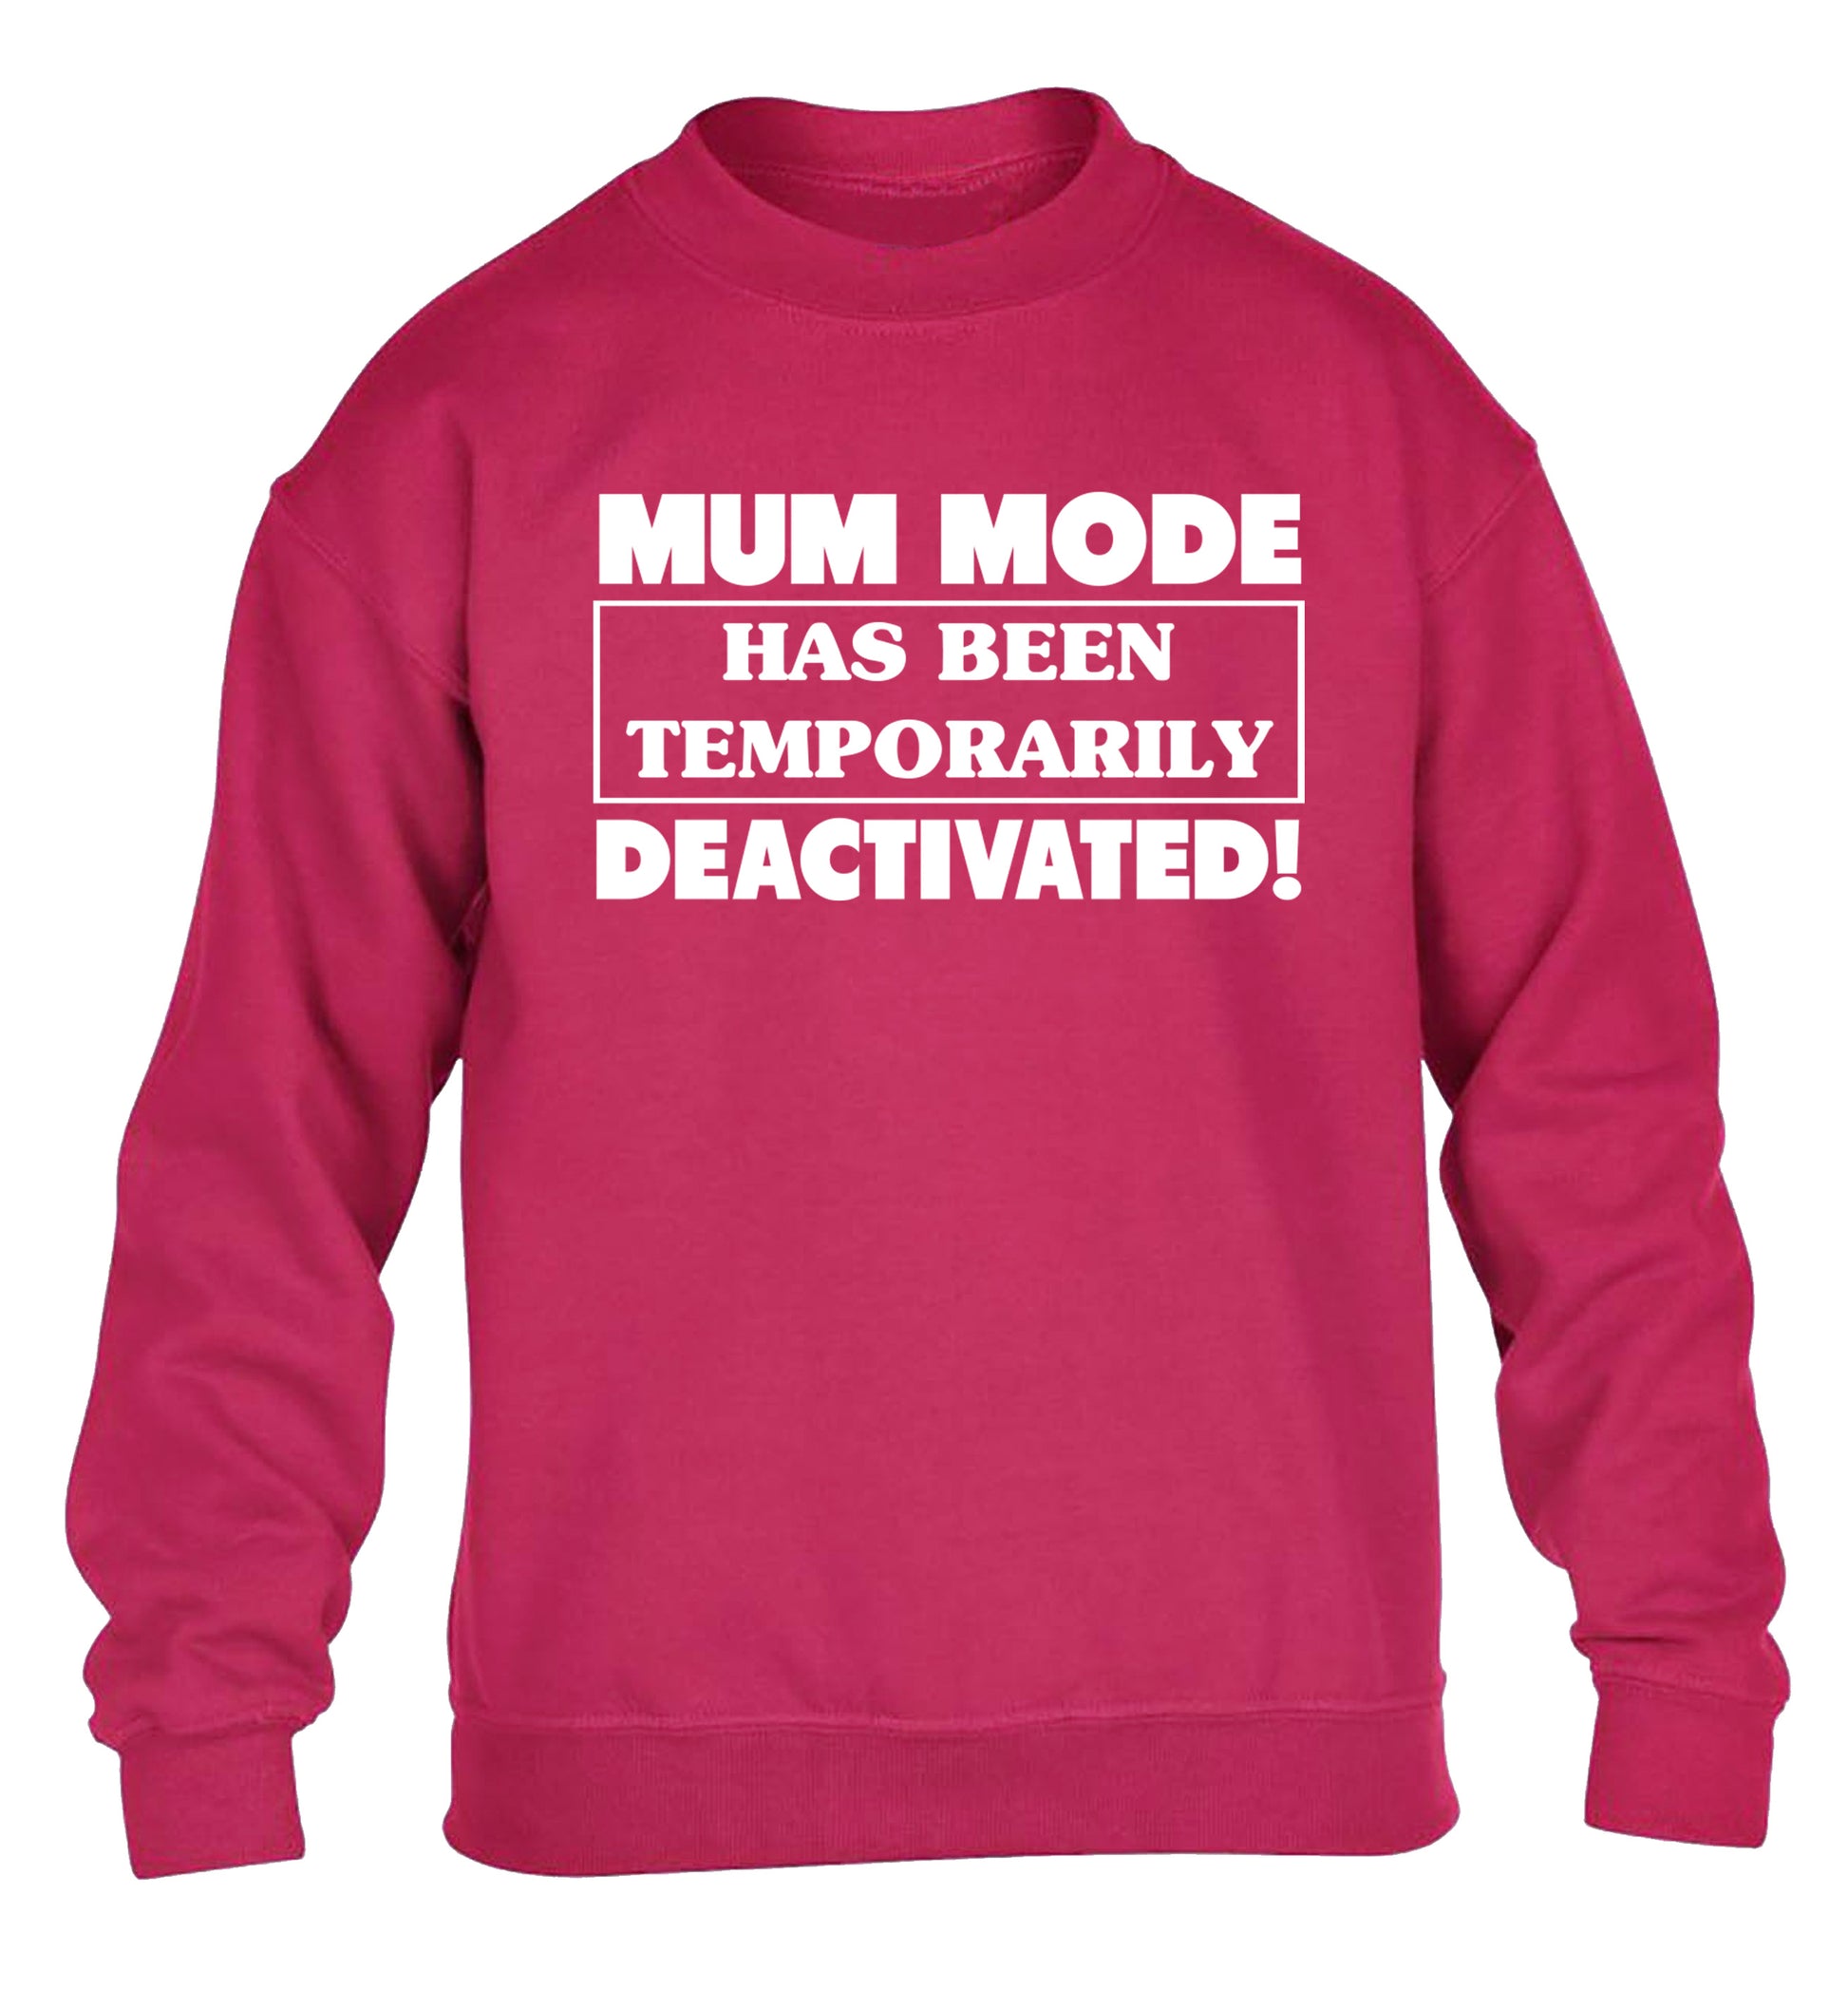 Mum mode has been temporarily deactivated! children's pink sweater 12-13 Years